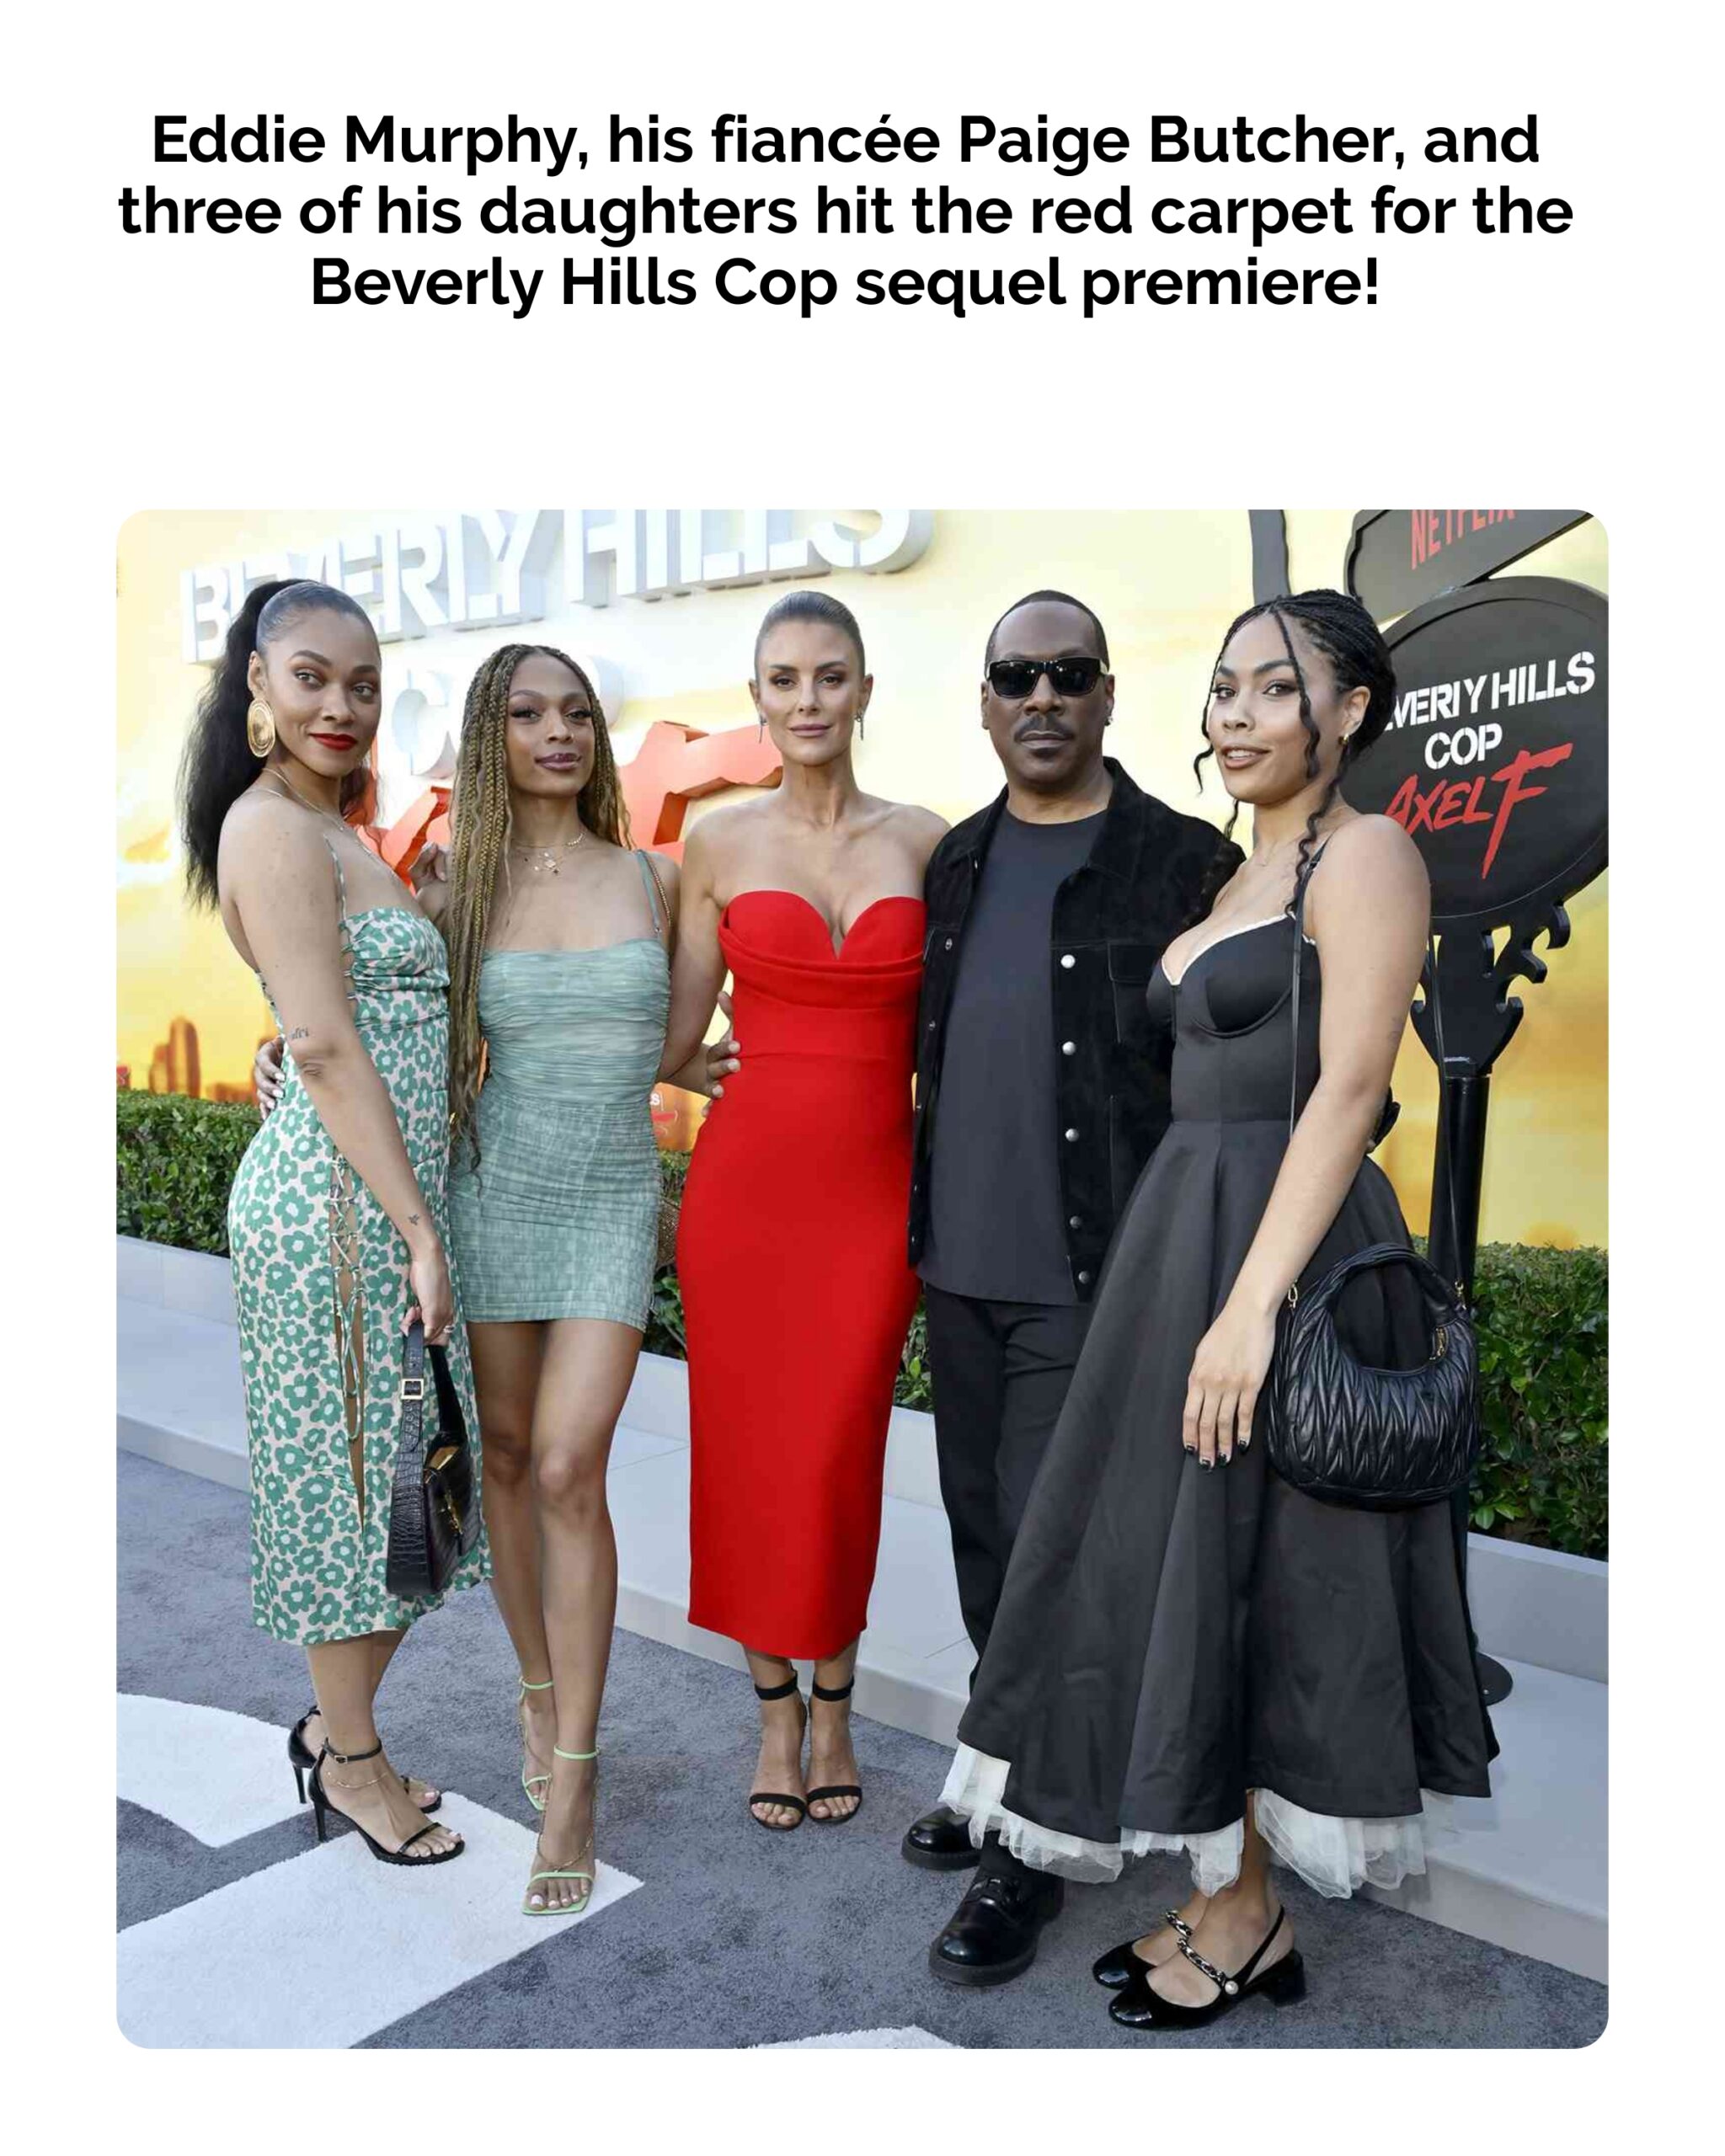 Eddie Murphy Joined by 3 of His Daughters and Fiancée Paige Butcher at Premiere of Beverly Hills Cop Sequel